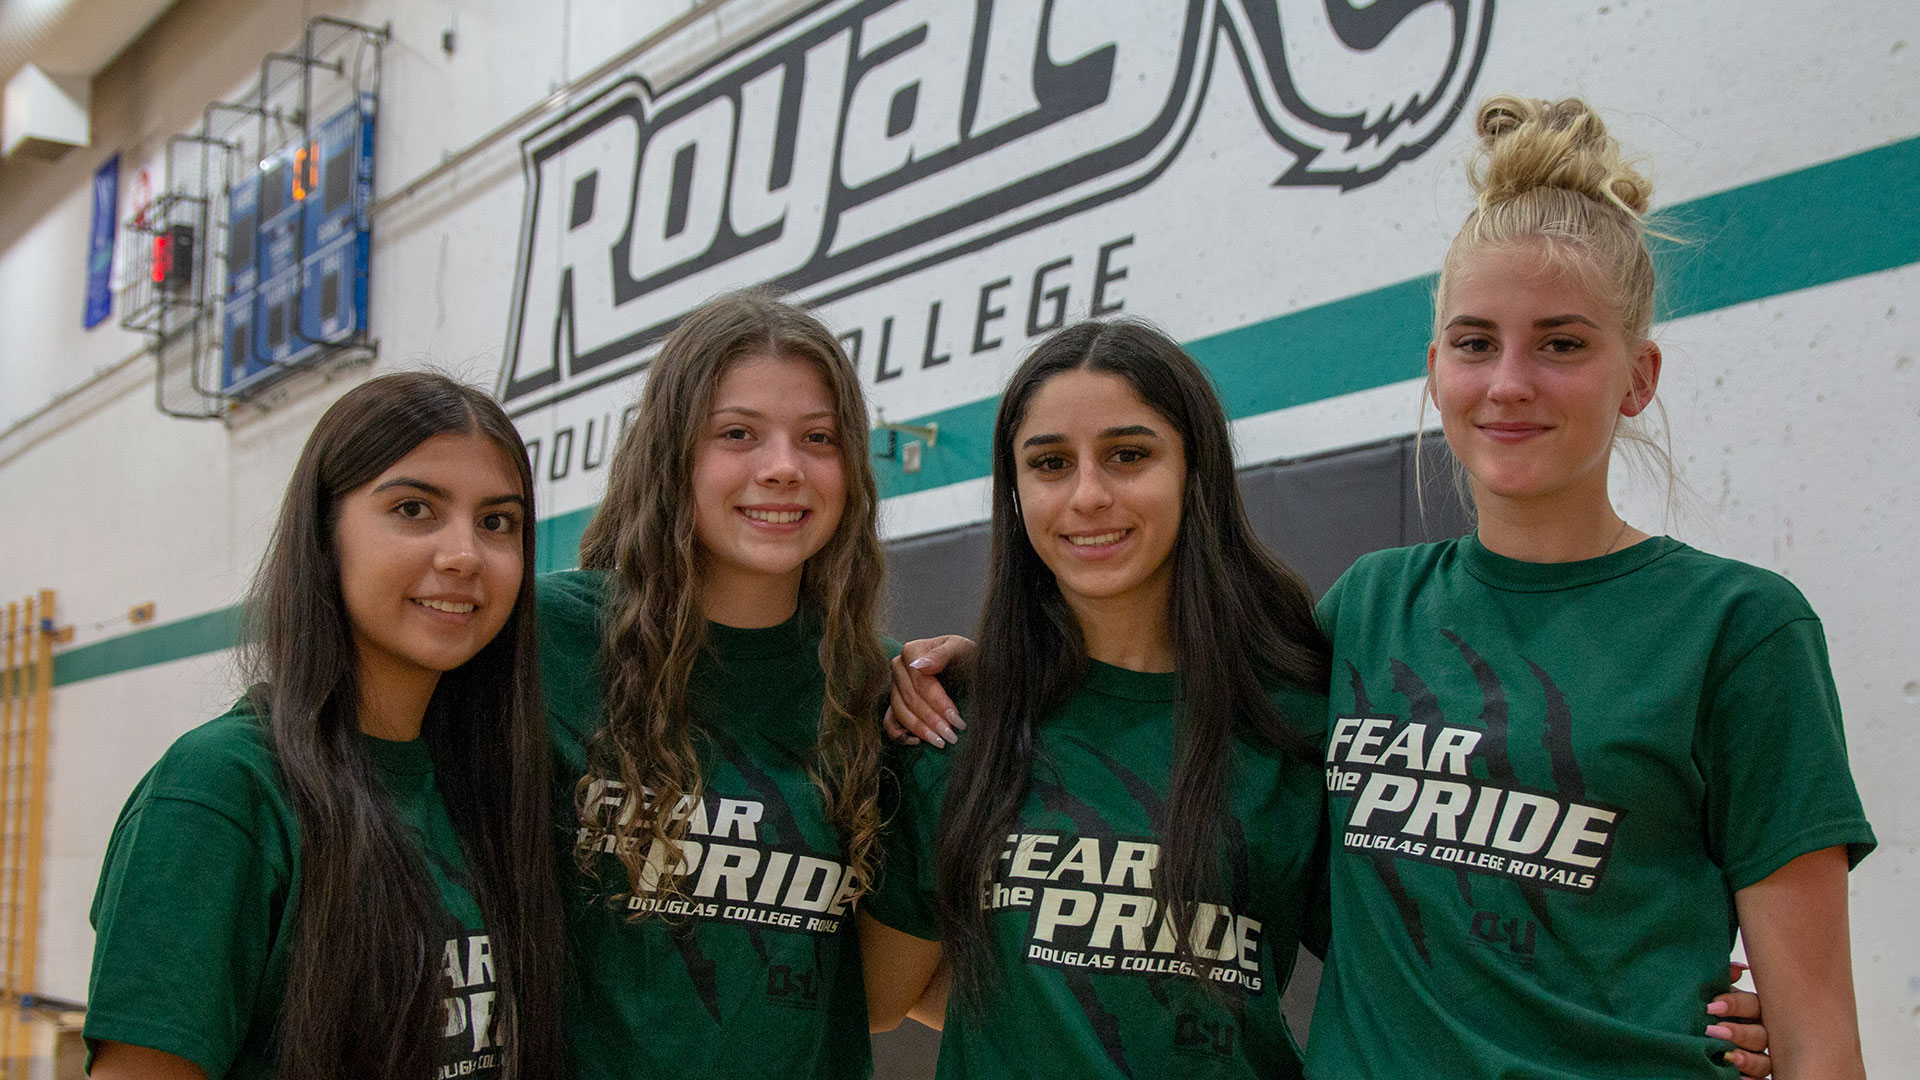 Newest additions to the 2019-20 Royals recruiting class. Pictured L-R: Kya Cleto, Taylor Spong, Isabella Silva, and Sophie Irvine